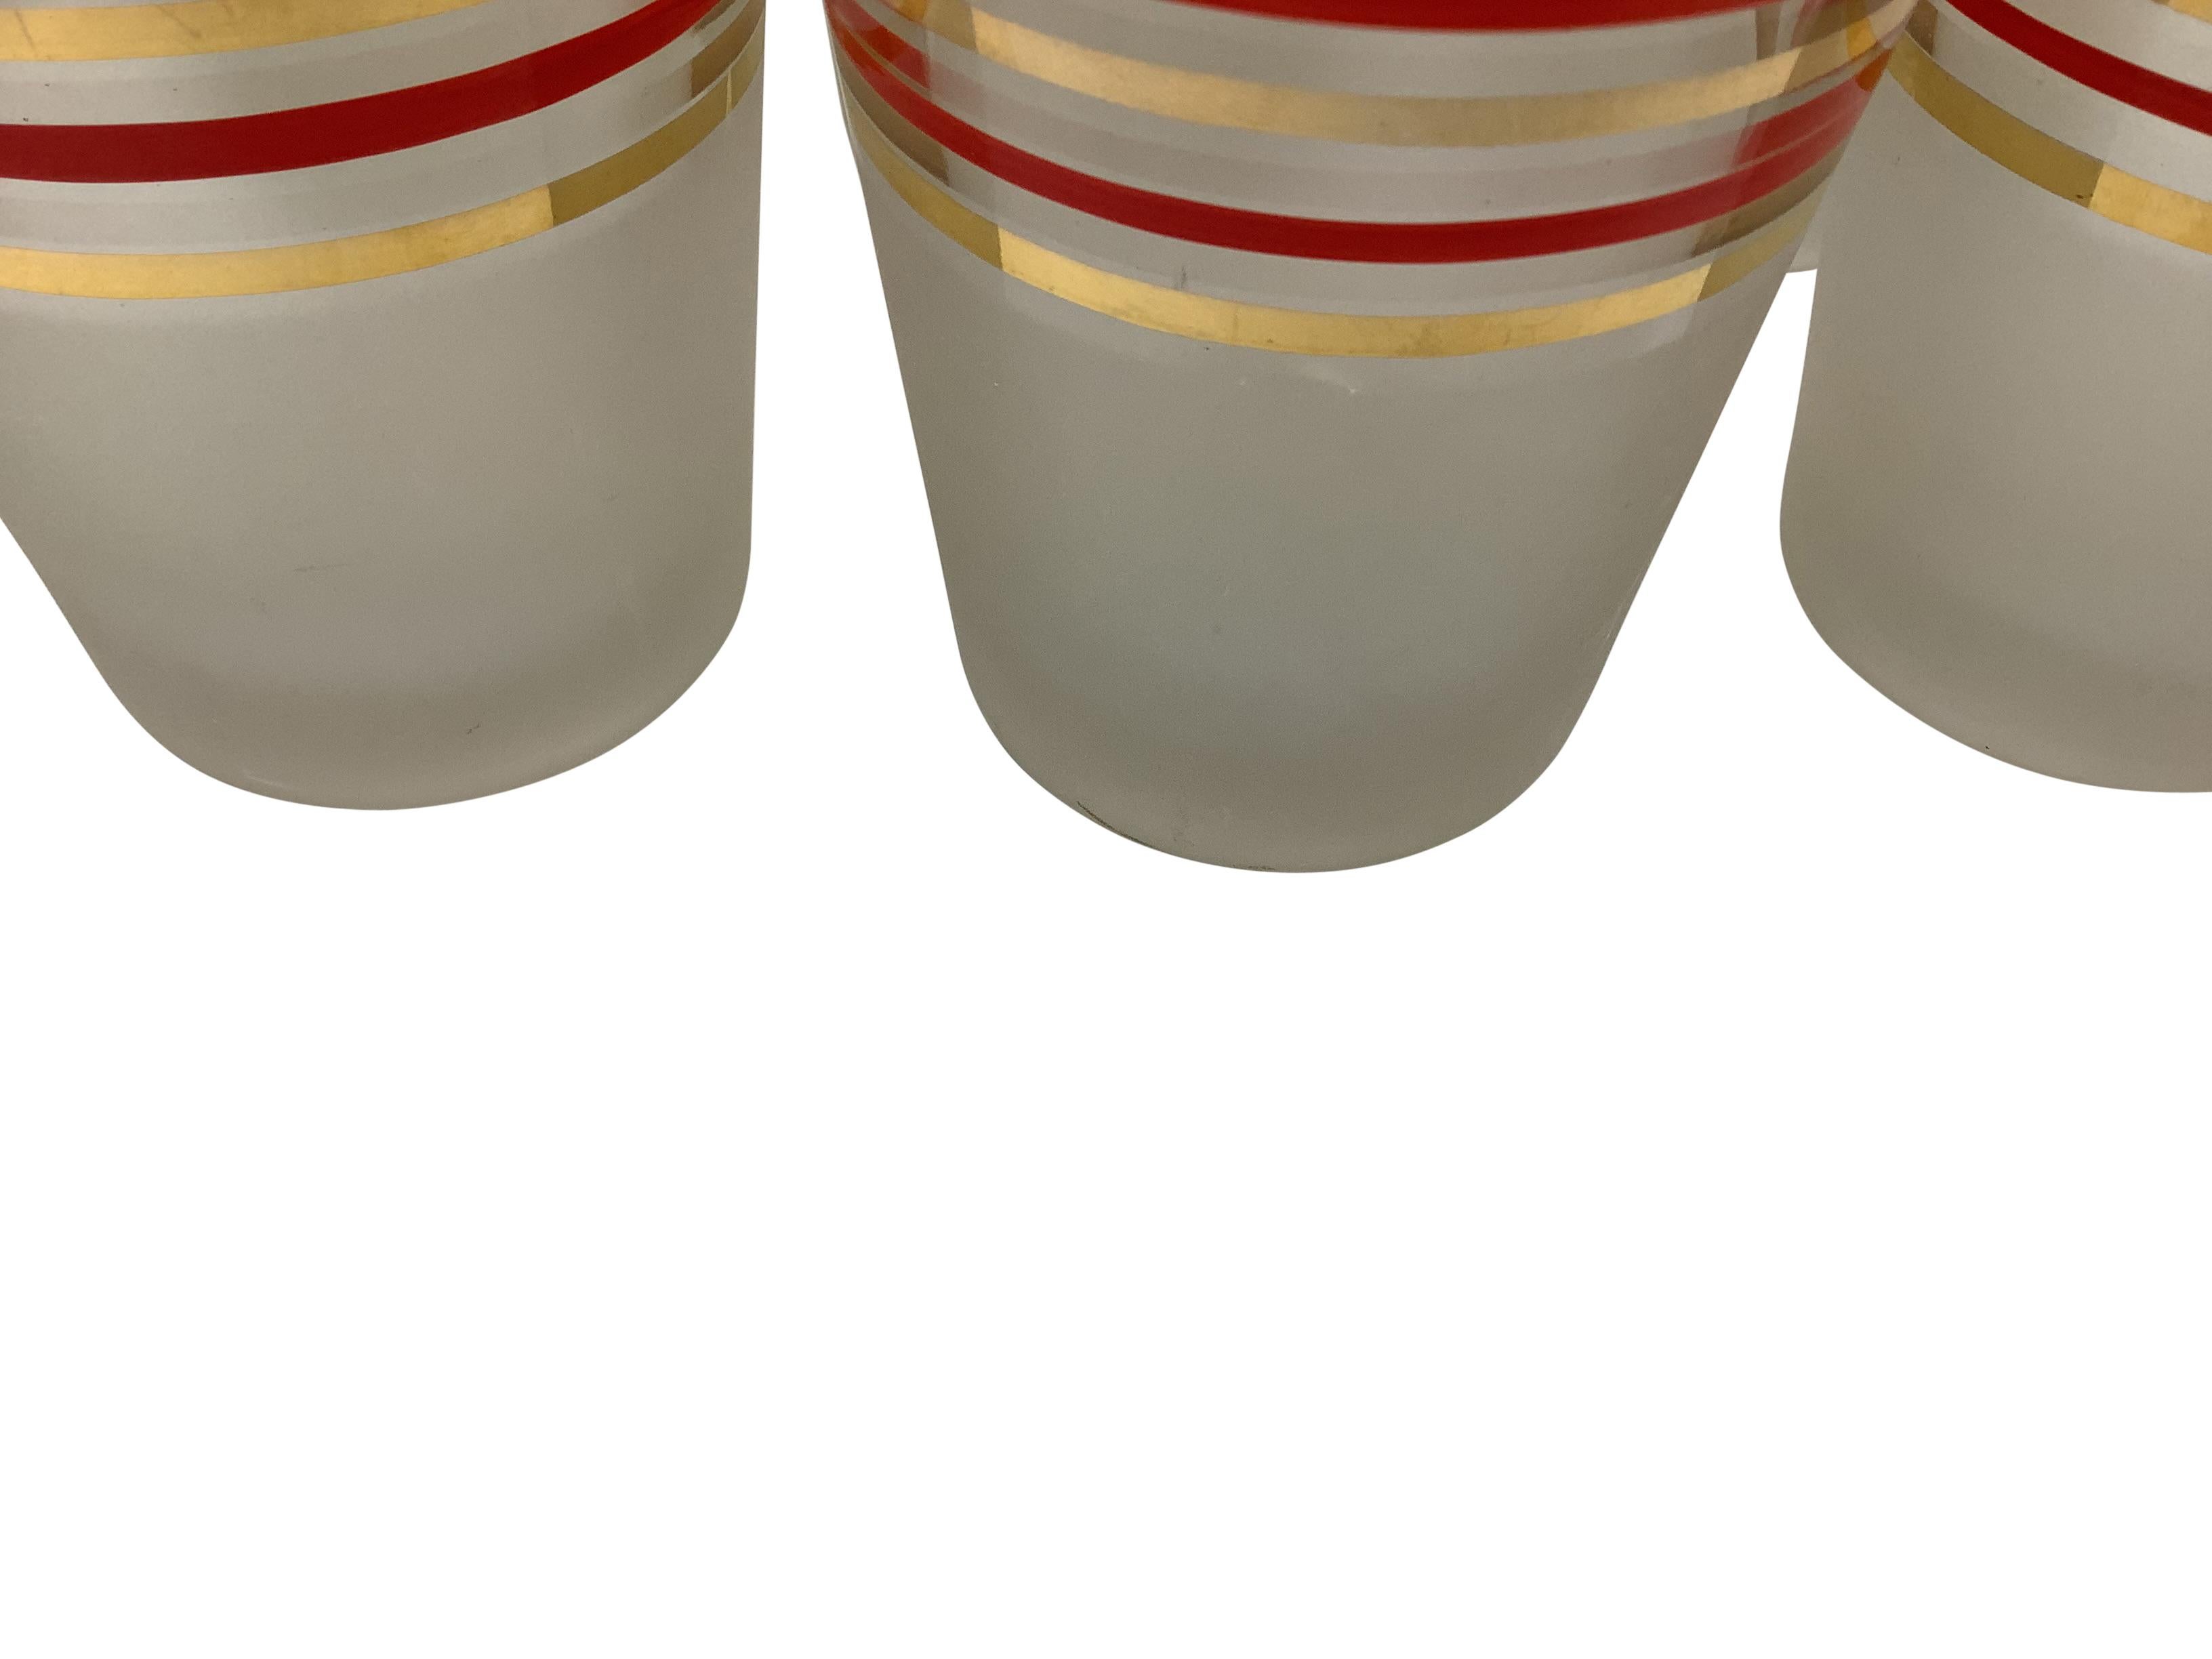 American Old Fashioned Rocks Frosted Cocktail Glasses With Red and Gold Bands - Set of 6 For Sale